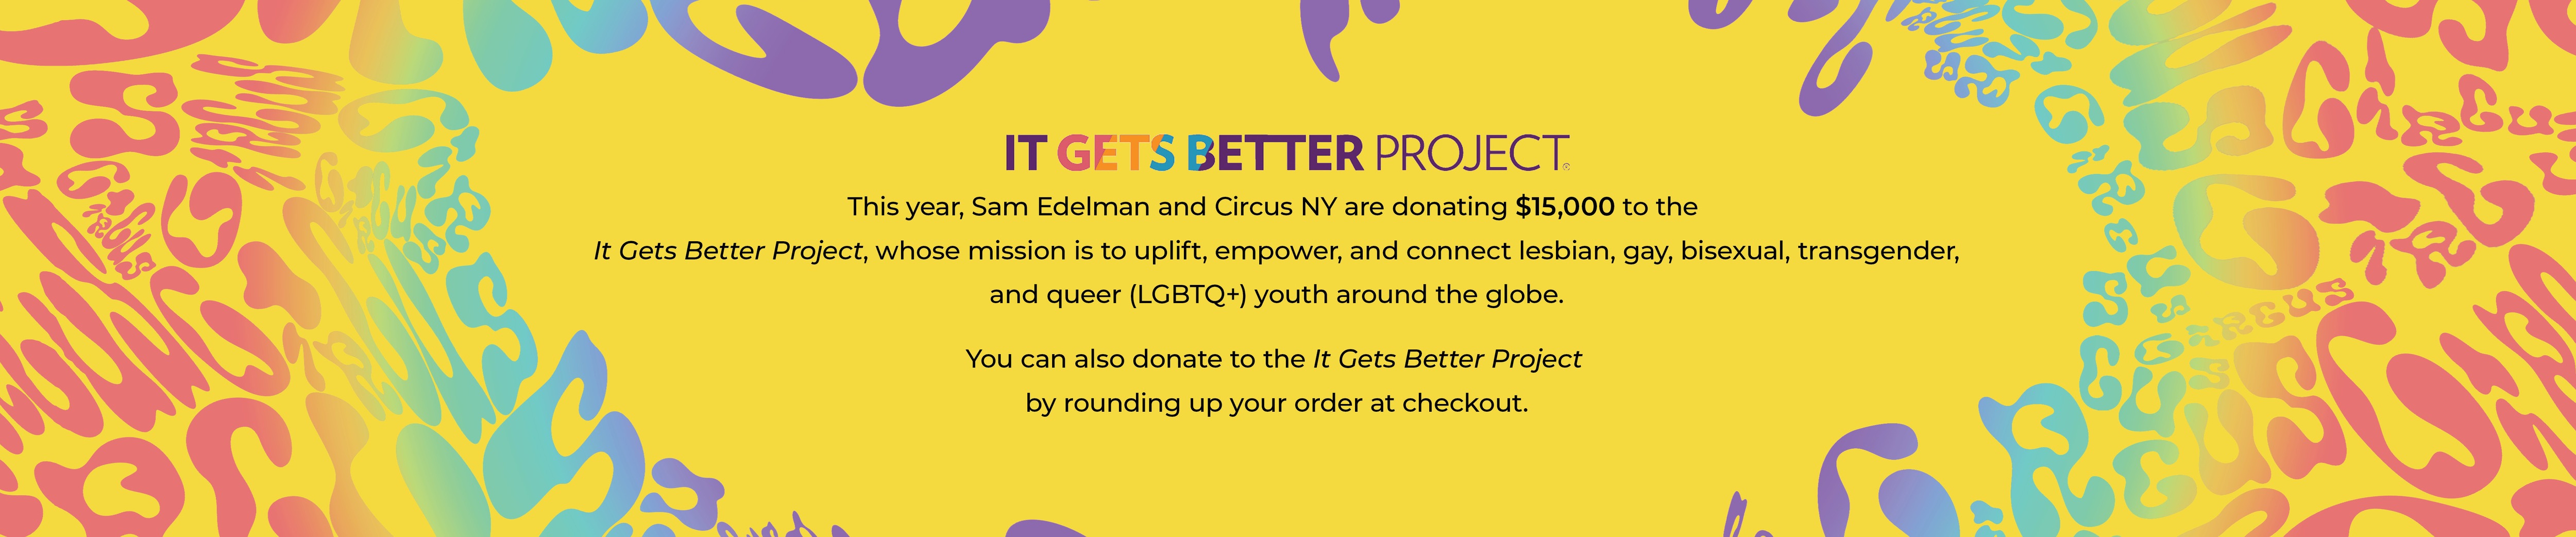 Circus NY and Sam Edelman are donating $15,000 to the It Gets Better Project. Learn more